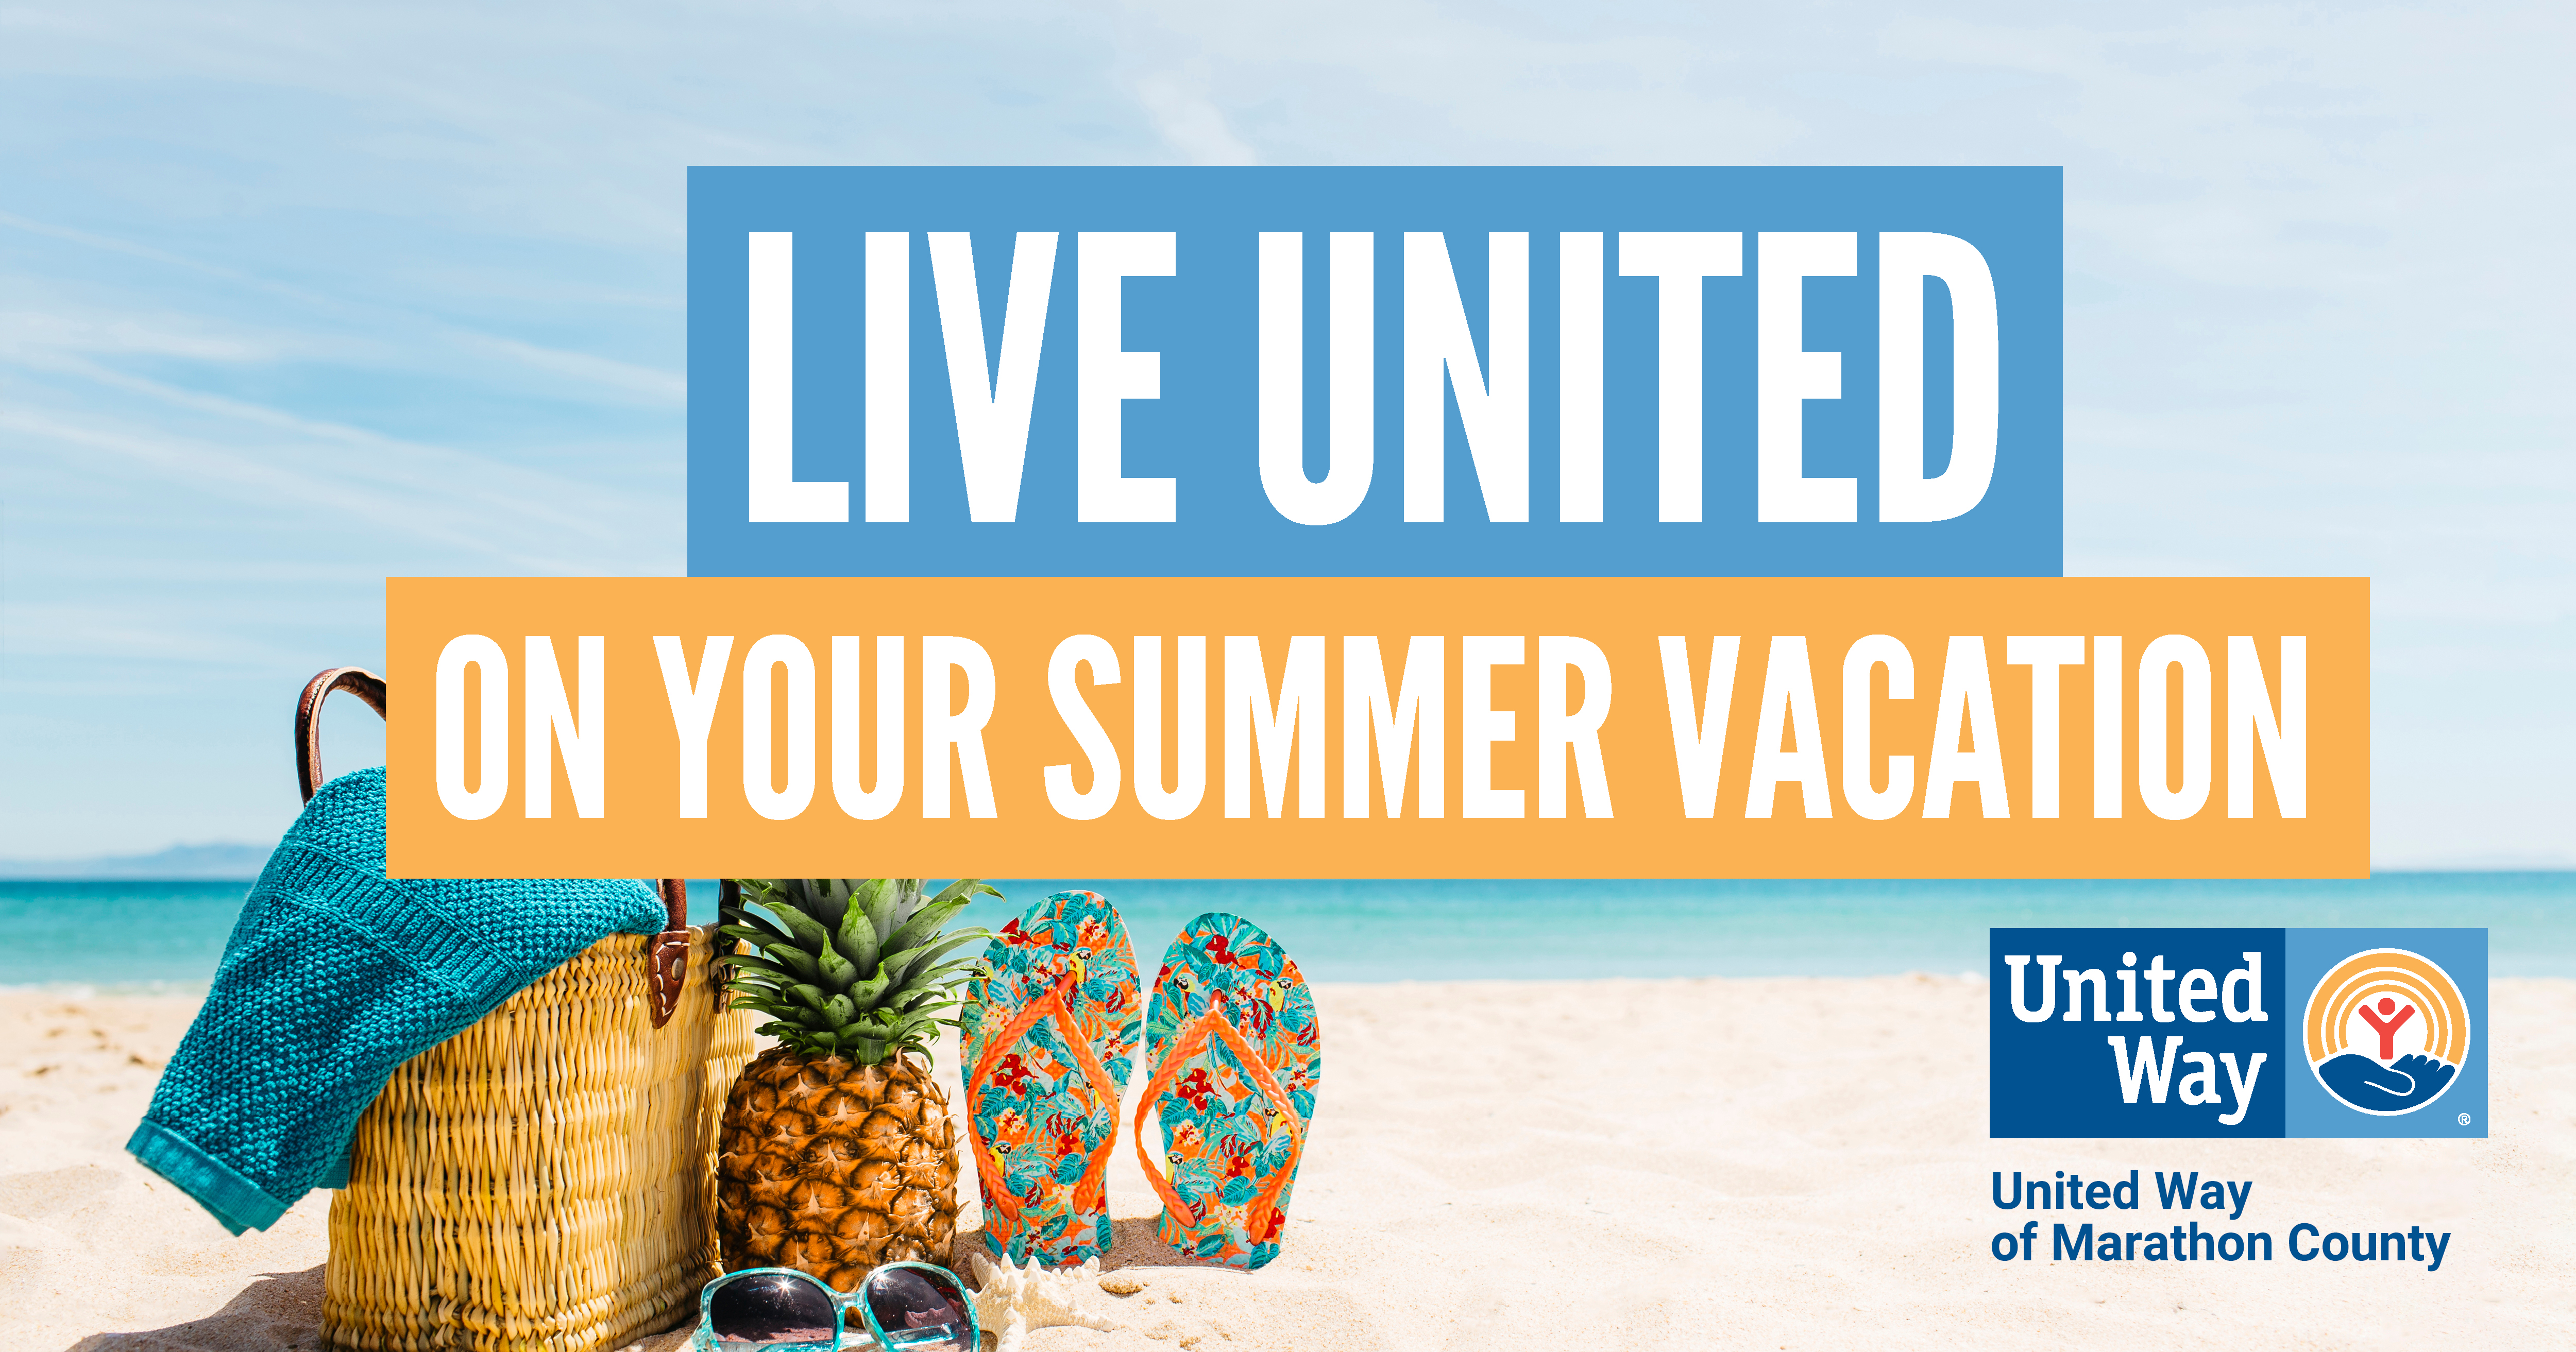 Live United on Your Summer Vacation.jpg